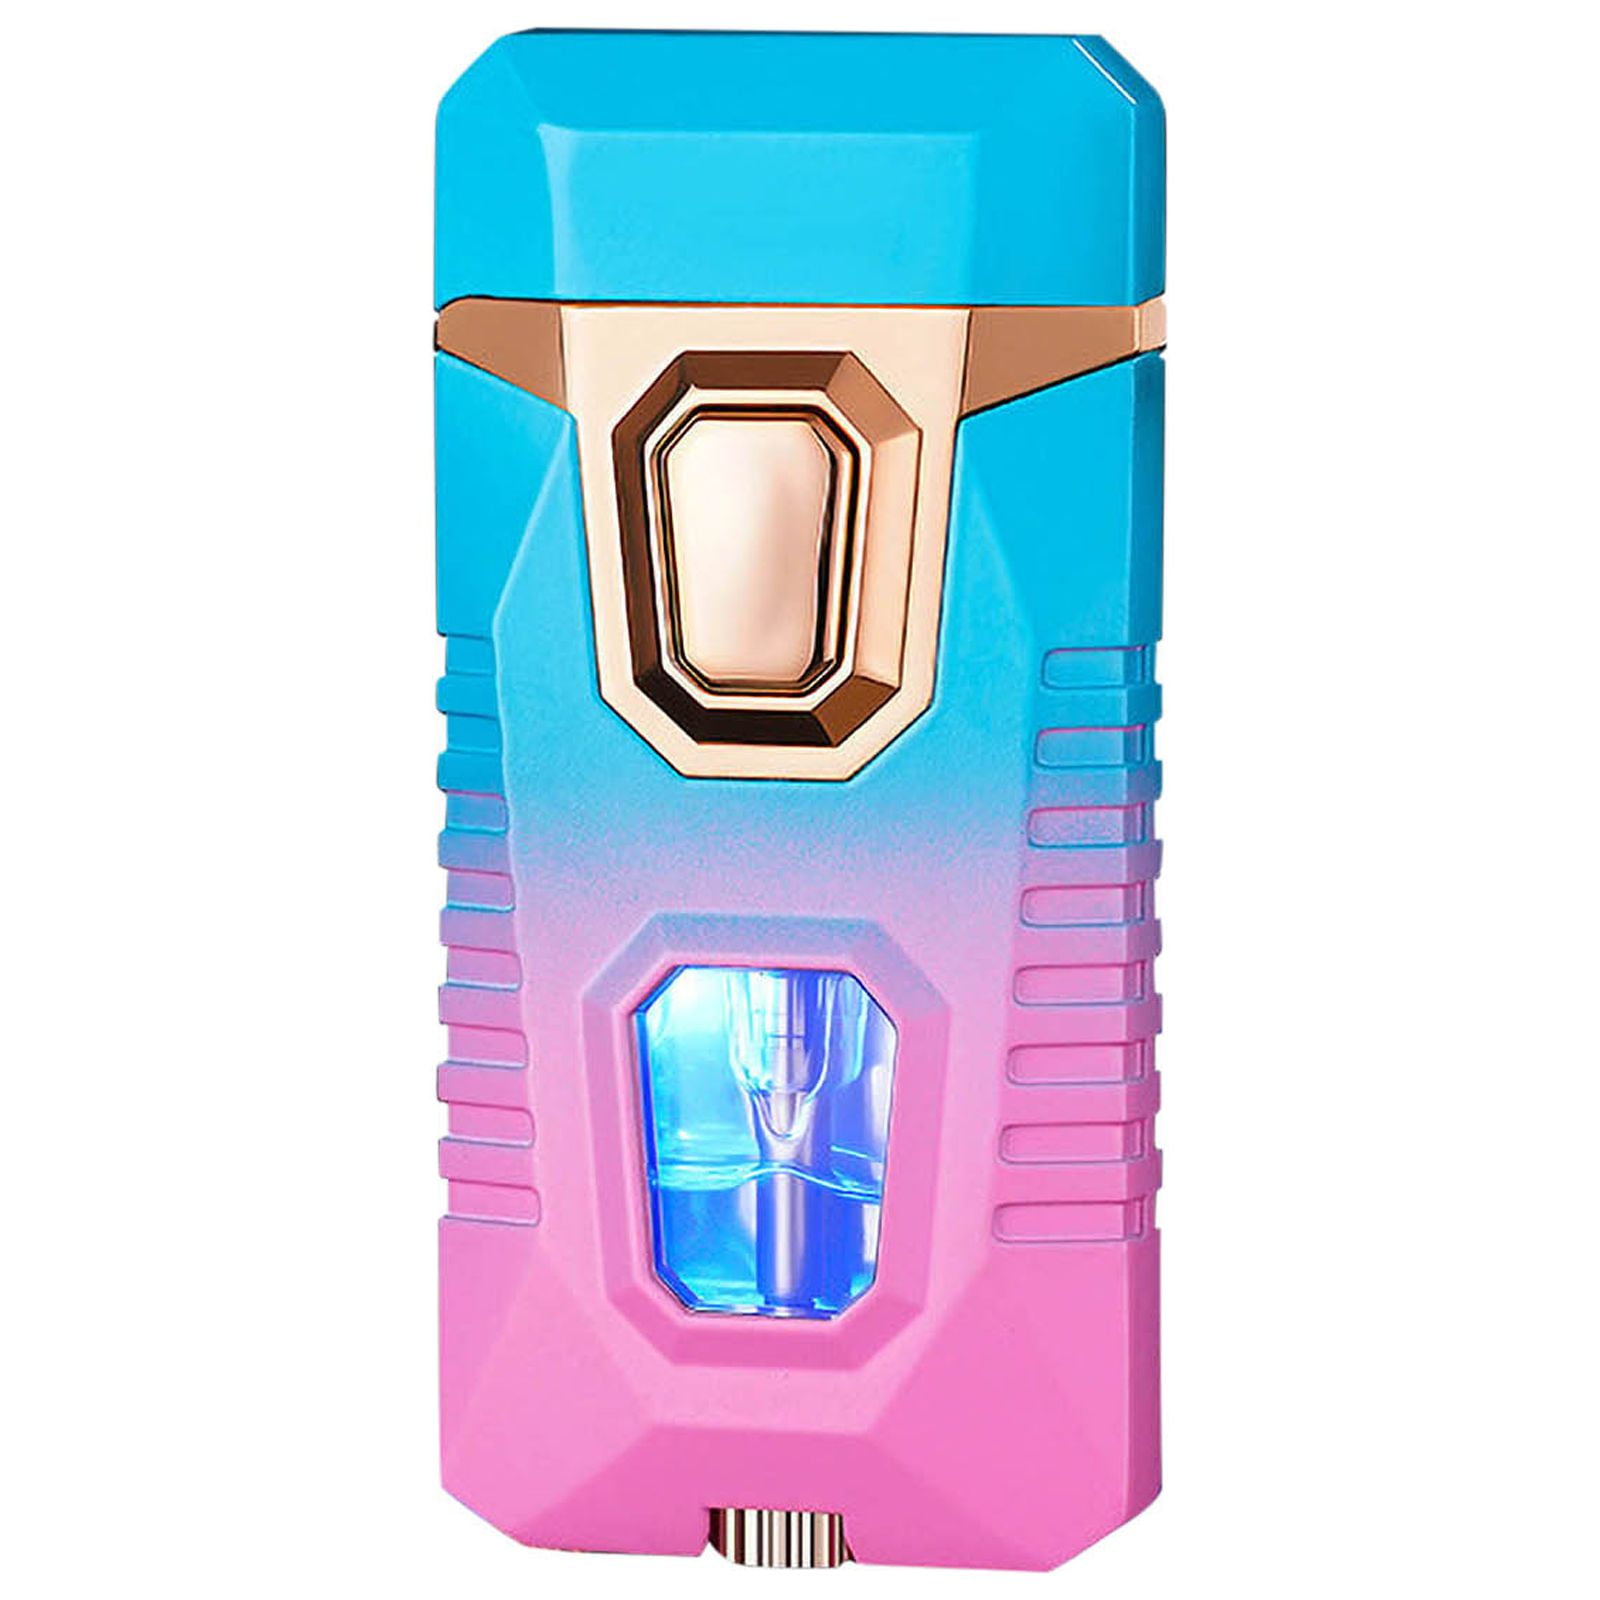 Deagia Flameless Plasma Lighter Clearance Flame Lighter with 5 Flints Blue  Visible Compartment Windproof Butane Gas Lighter Adjustable Flame and Flame  ...